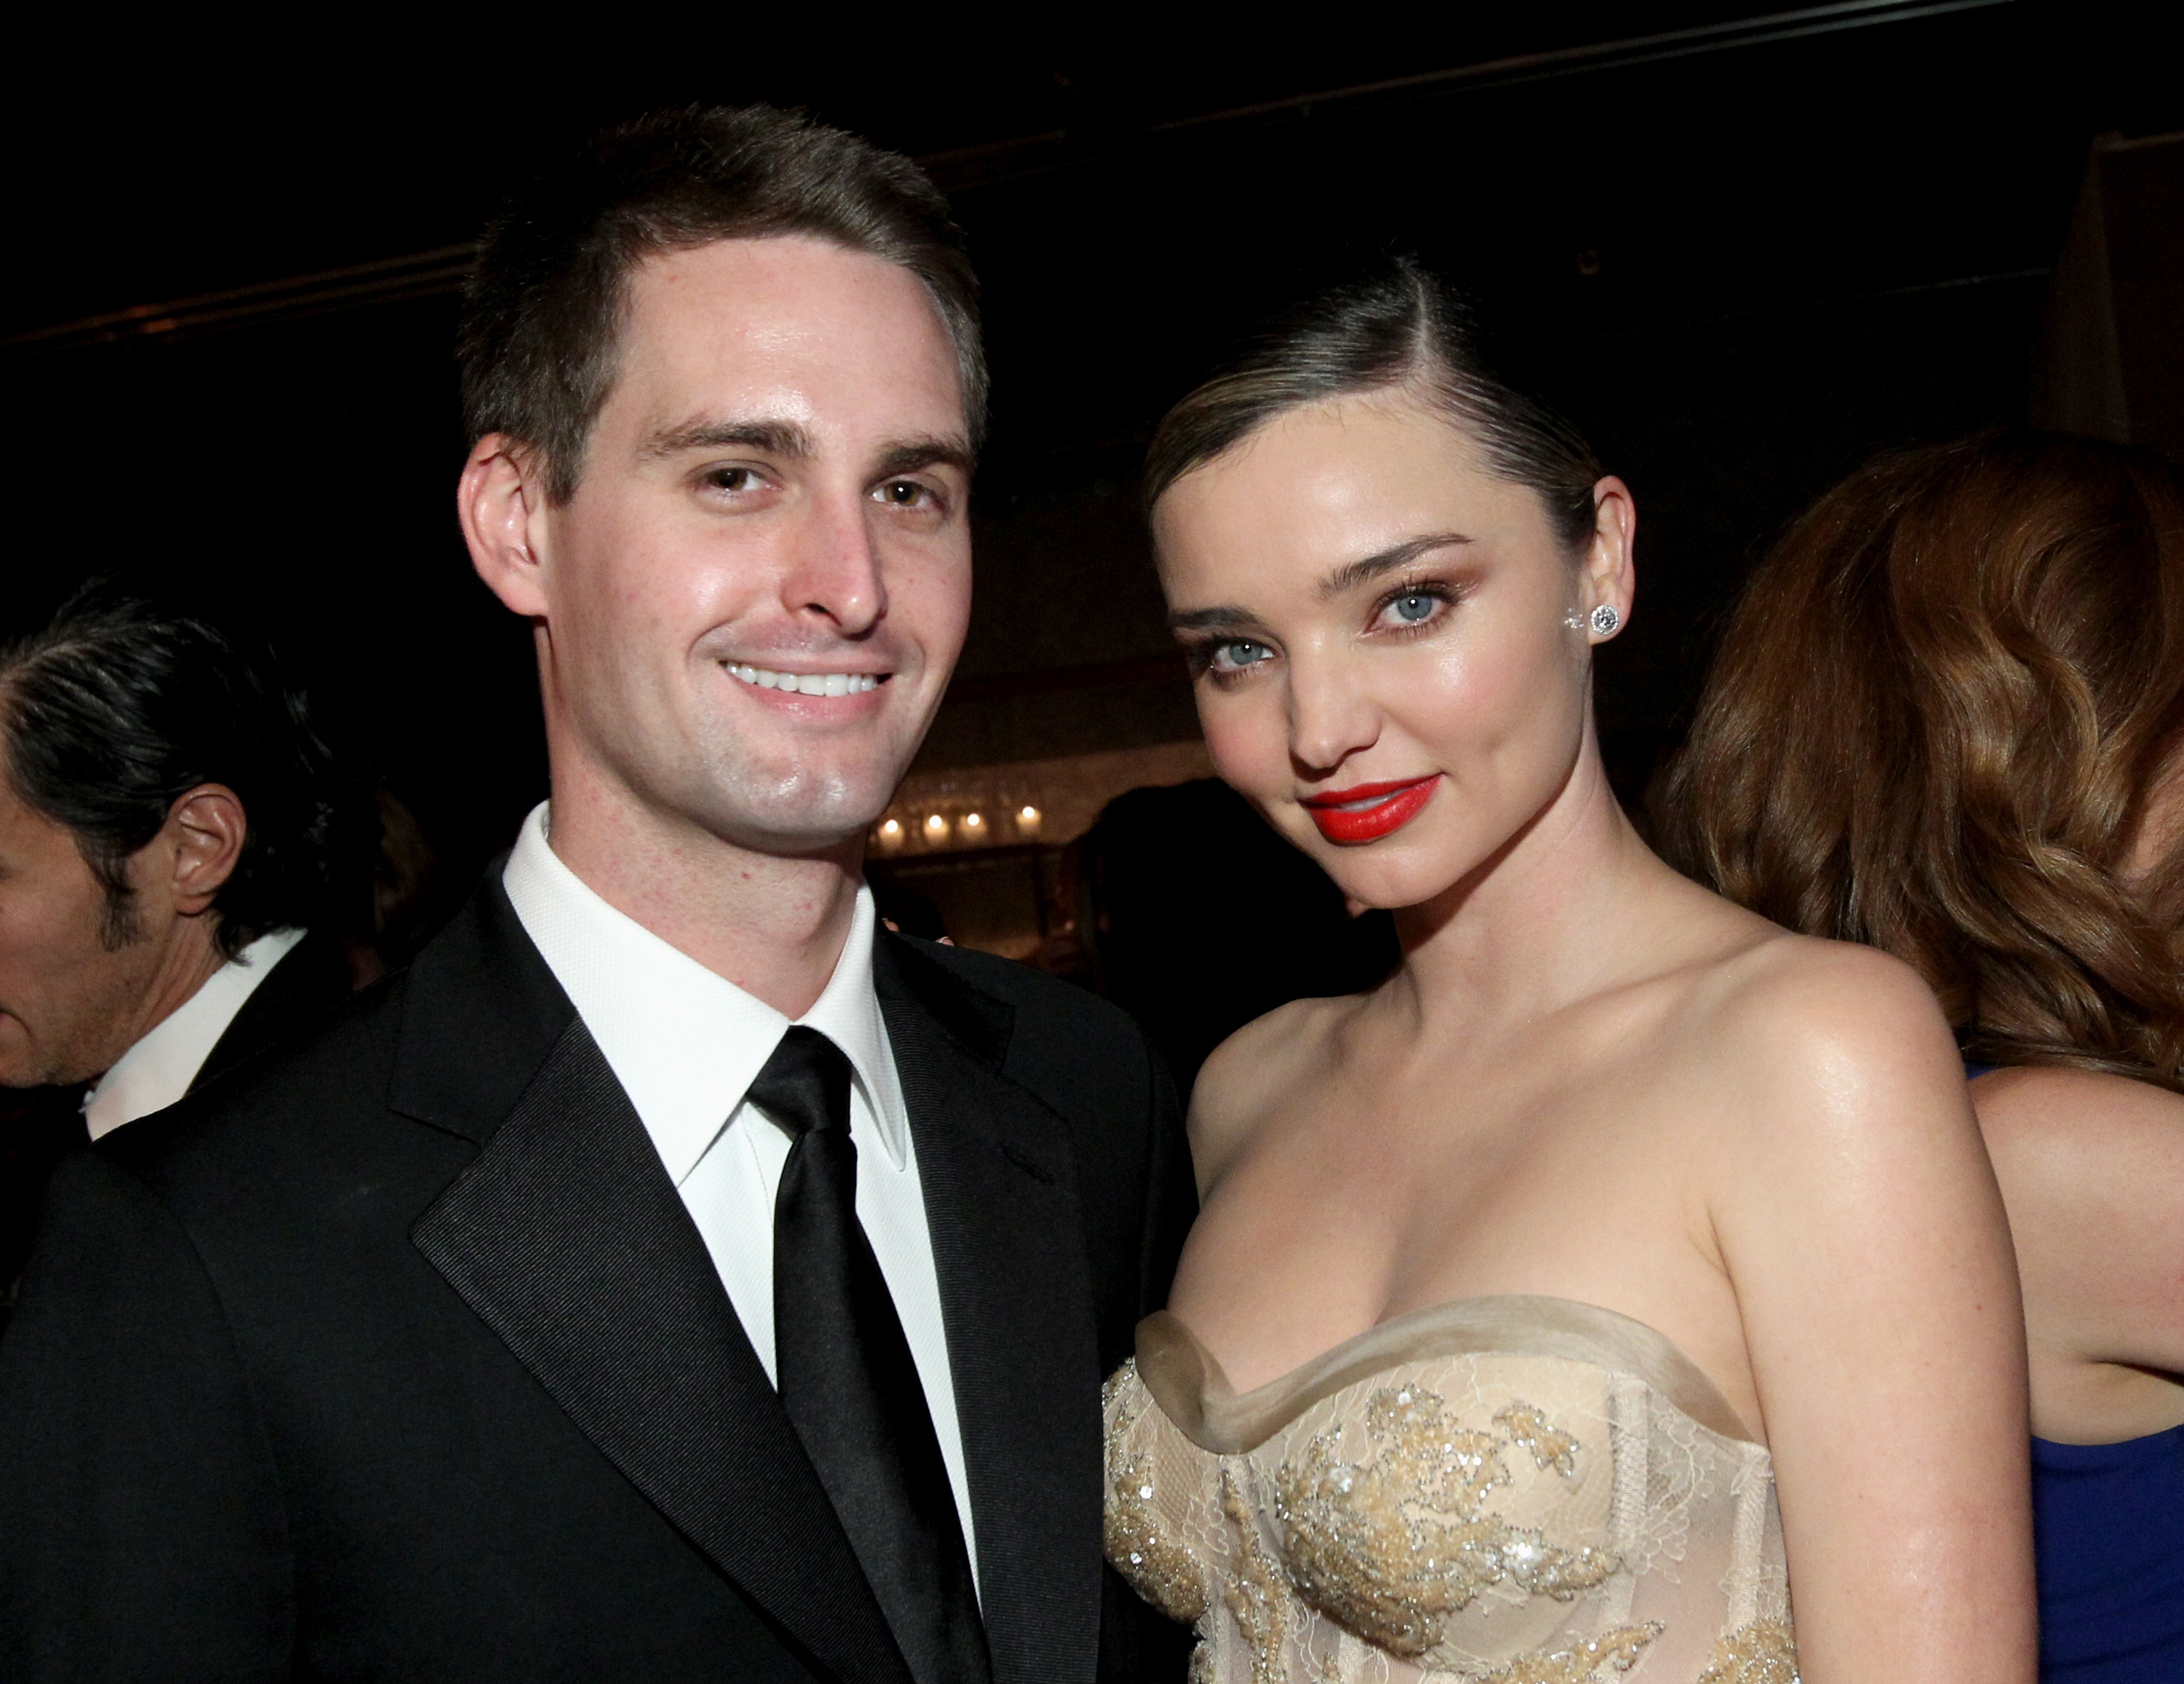 Founder, Snapchat Evan Spiegel (L) and model Miranda Kerr attend the Fifth Annual Baby2Baby Gala, Presented By John Paul Mitchell Systems at 3LABS on November 12, 2016 in Culver City, California. (Tommaso Boddi&mdash;Getty Images for Baby2Baby)